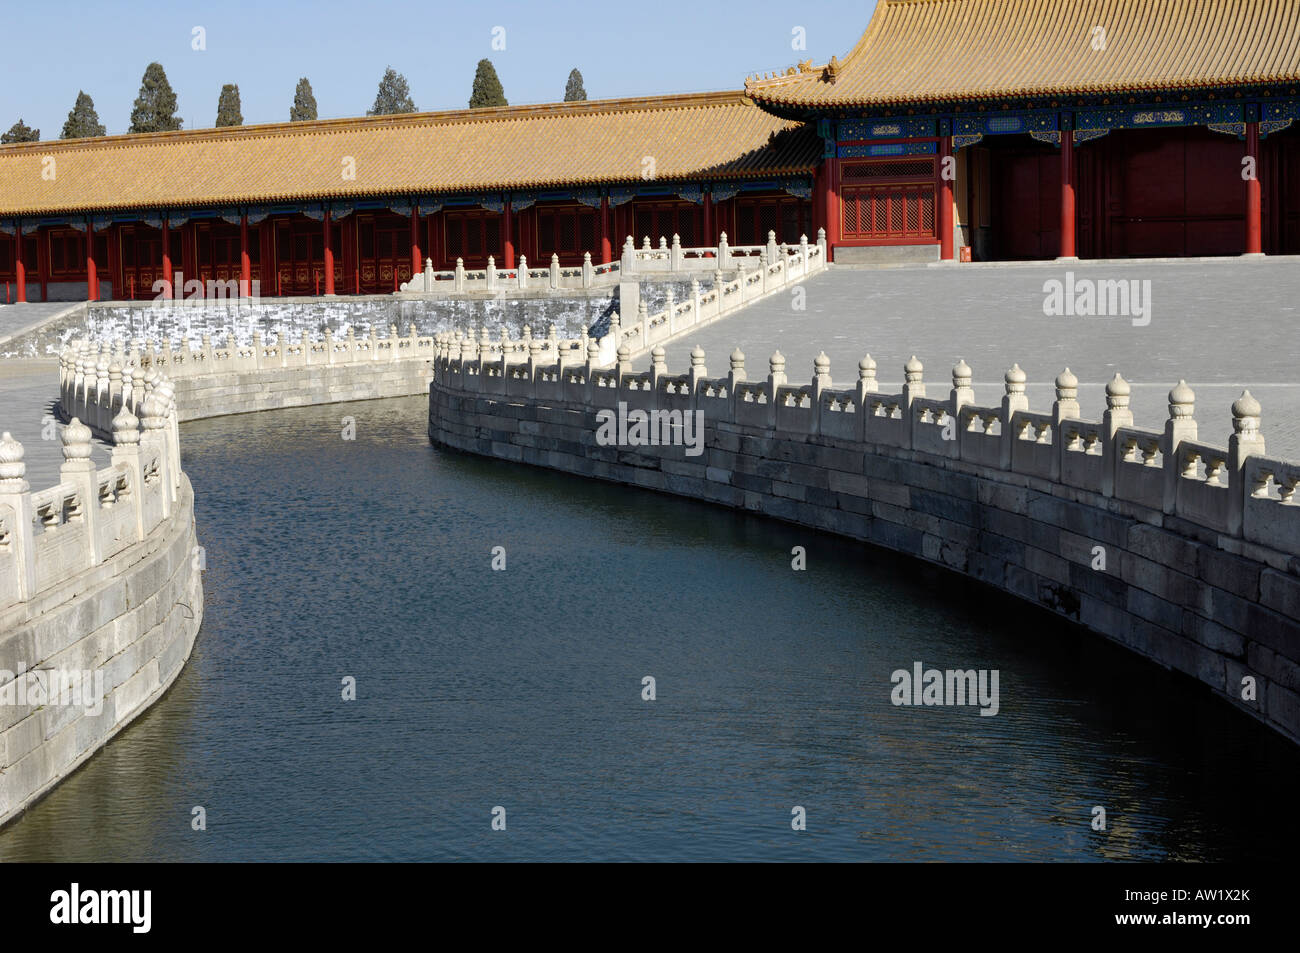 Imperial Palace Museum (Forbidden City) Golden River with marble balustrades. 03-Mar-2008 Stock Photo